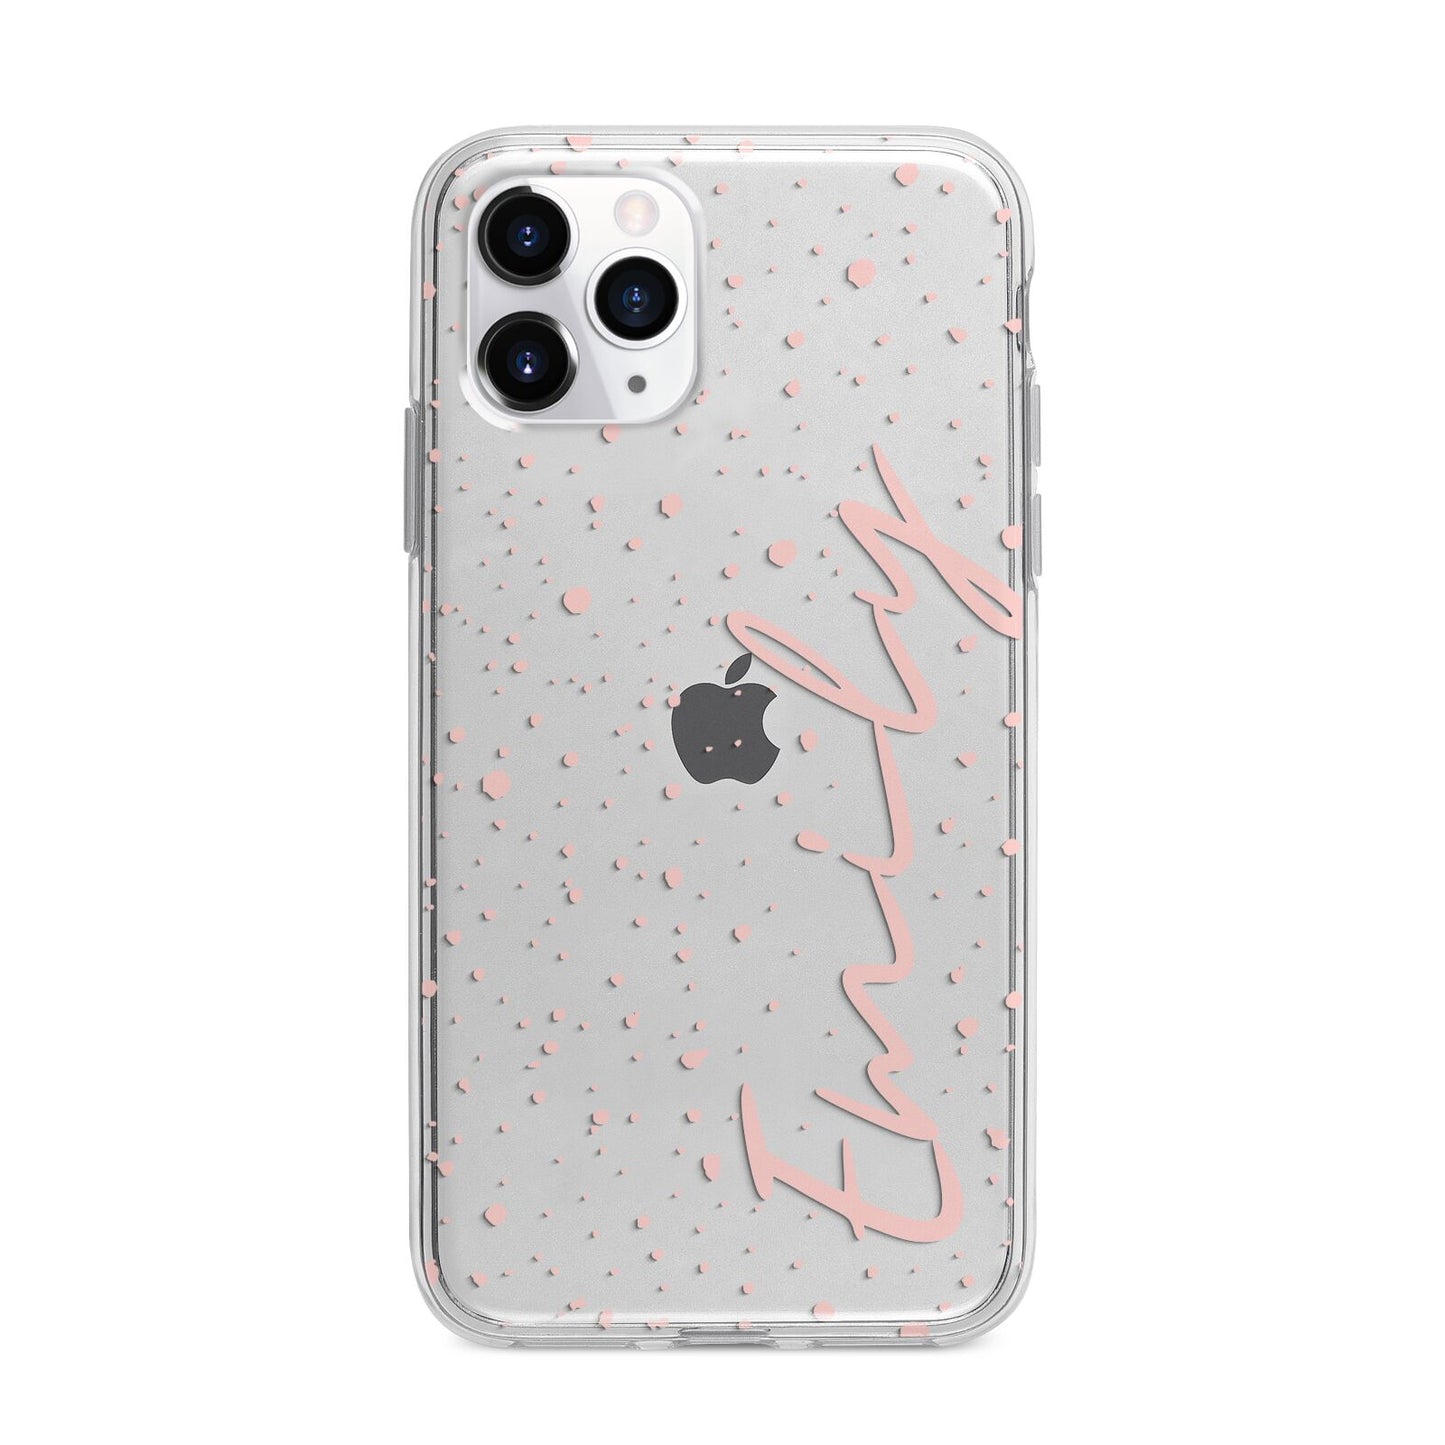 Custom Polka Dot Apple iPhone 11 Pro Max in Silver with Bumper Case